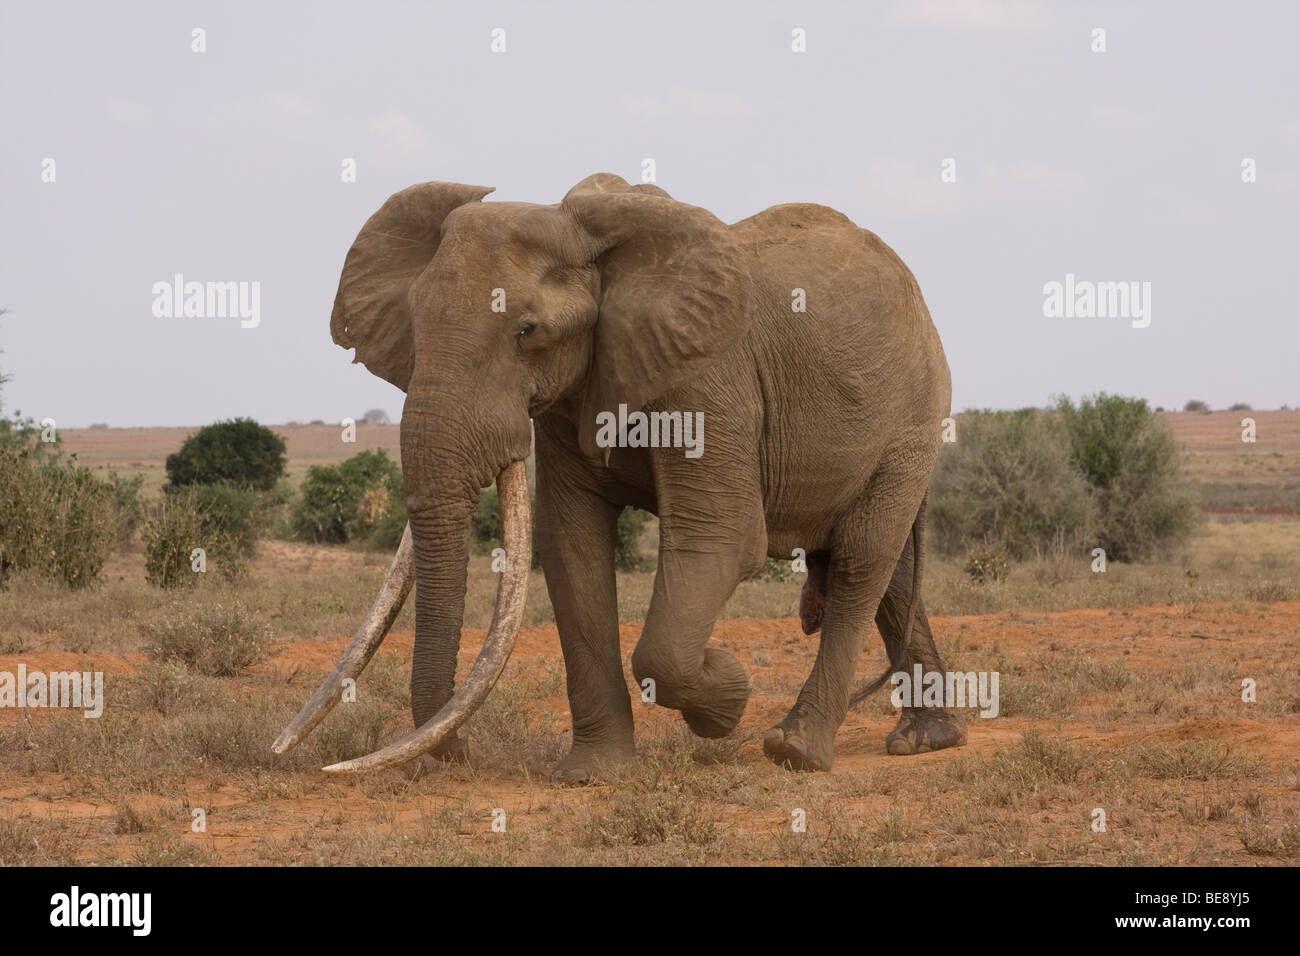 A large African elephant with tusks walking on red soil and sand towards the camera Stock Photo